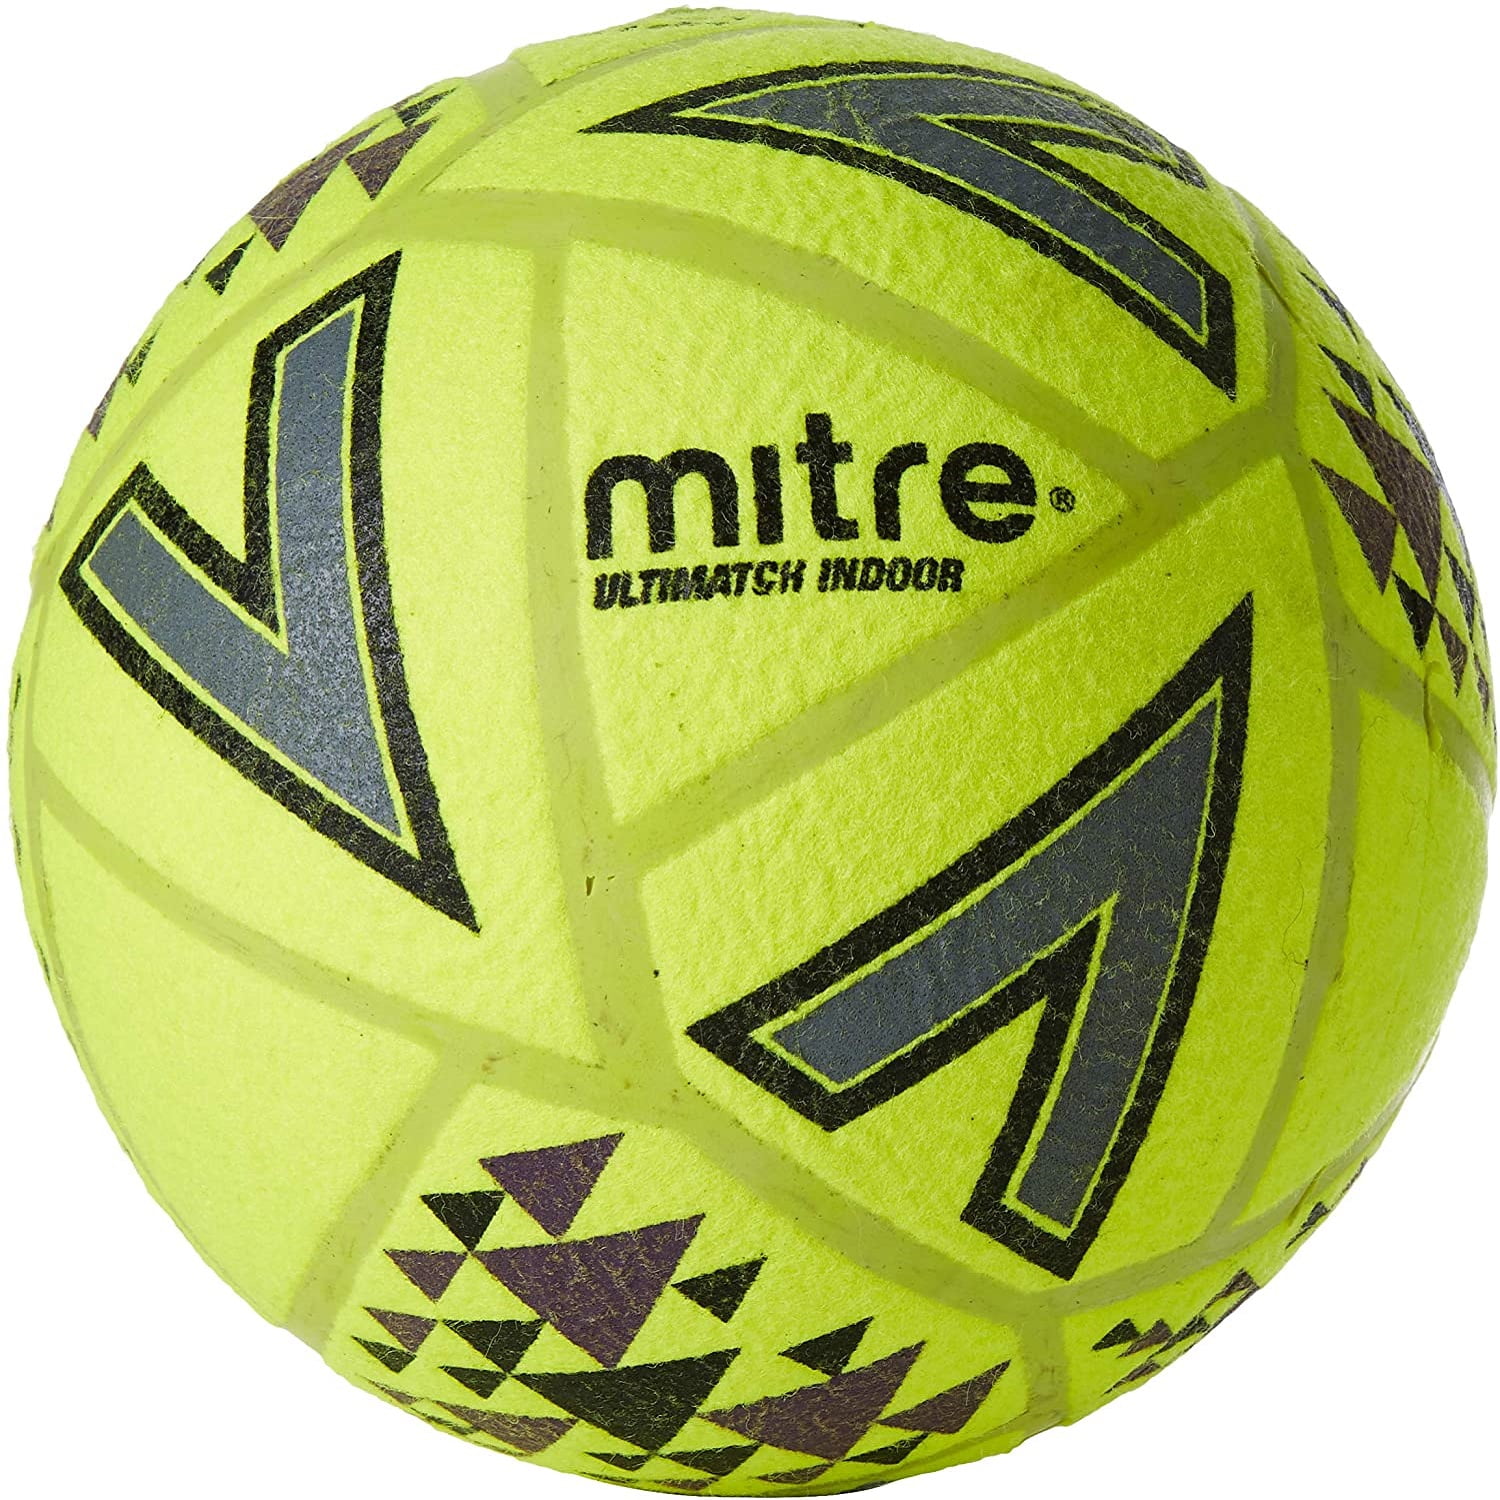 Mitre Indoor Football Ultimatch 3G Pitch Astroturf 